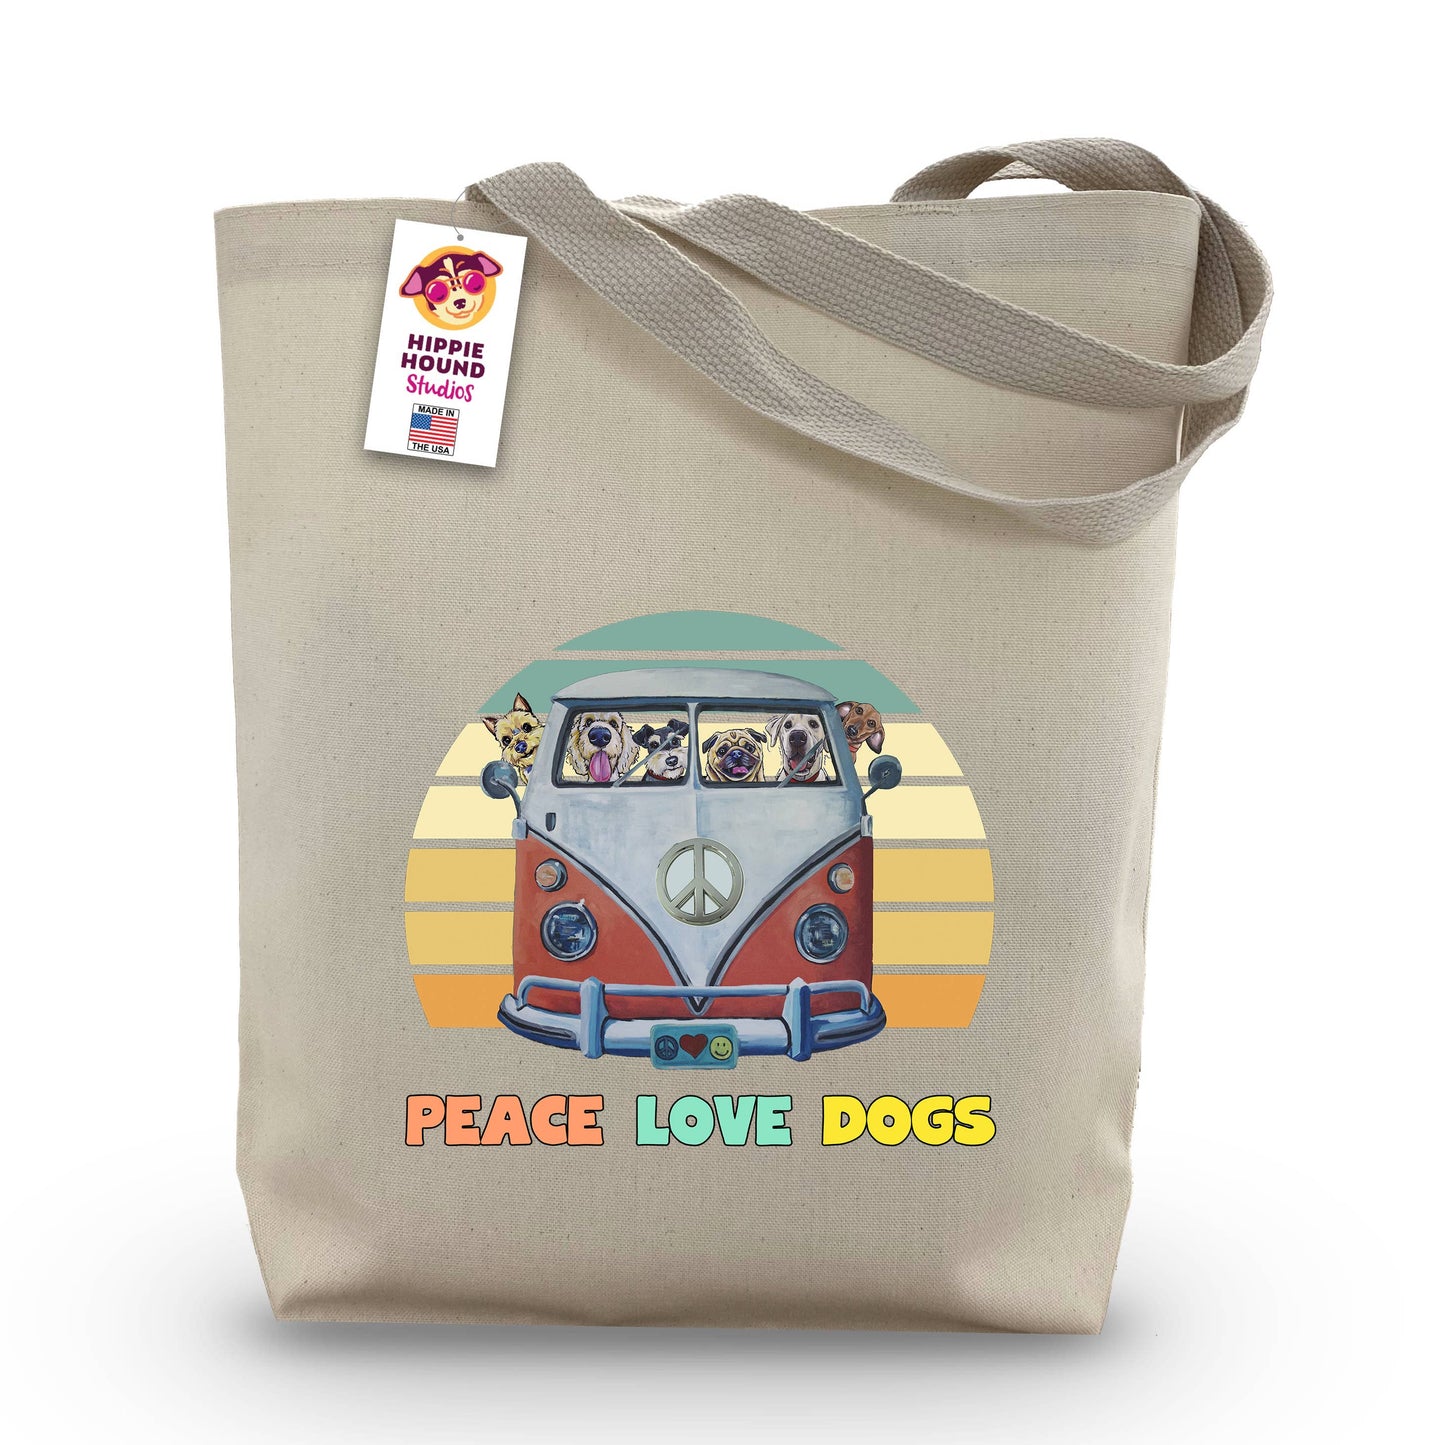 Hippie Hound Studios - Gusseted Tote Bag, Dog Tote Bag, Peace Love Dogs